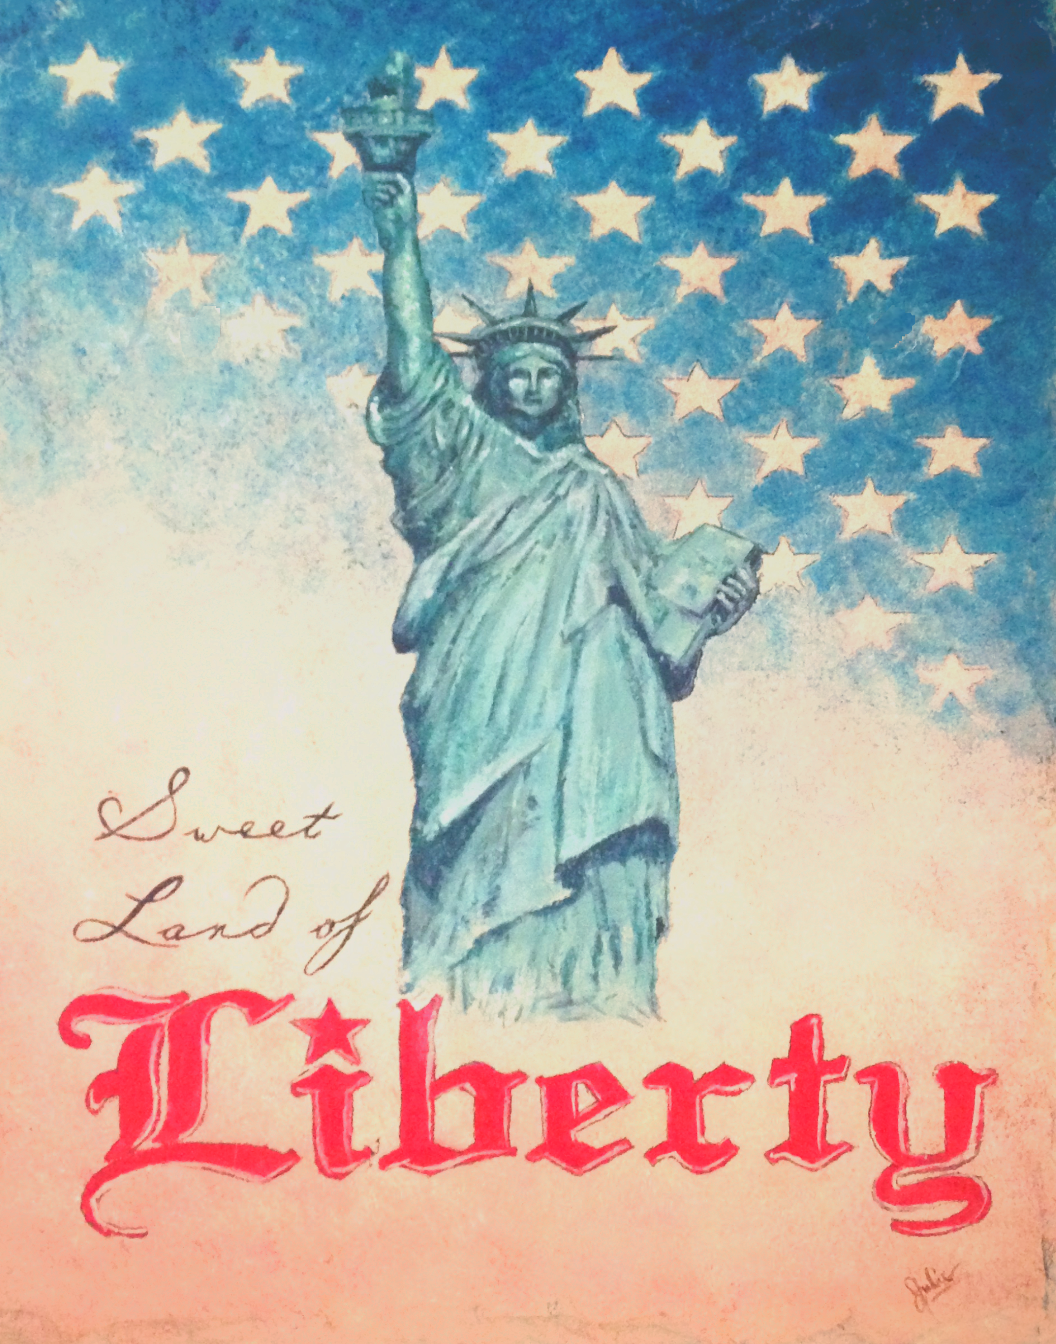 Sweet Land of Liberty Mouse Pad